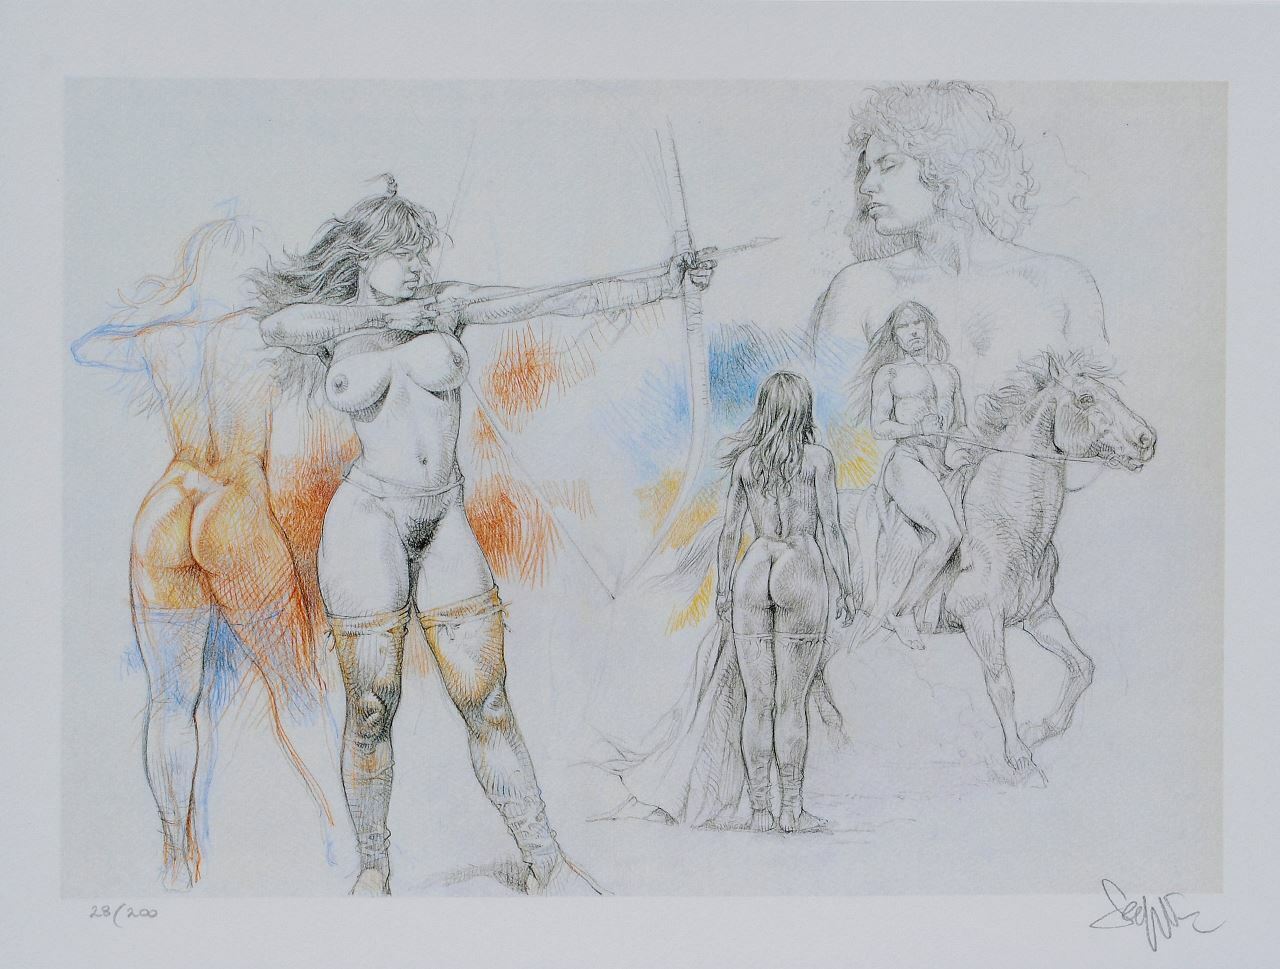 Paolo Serpieri: THE ARCHER, Print Offset Erotic Signed, 200ex, 2009